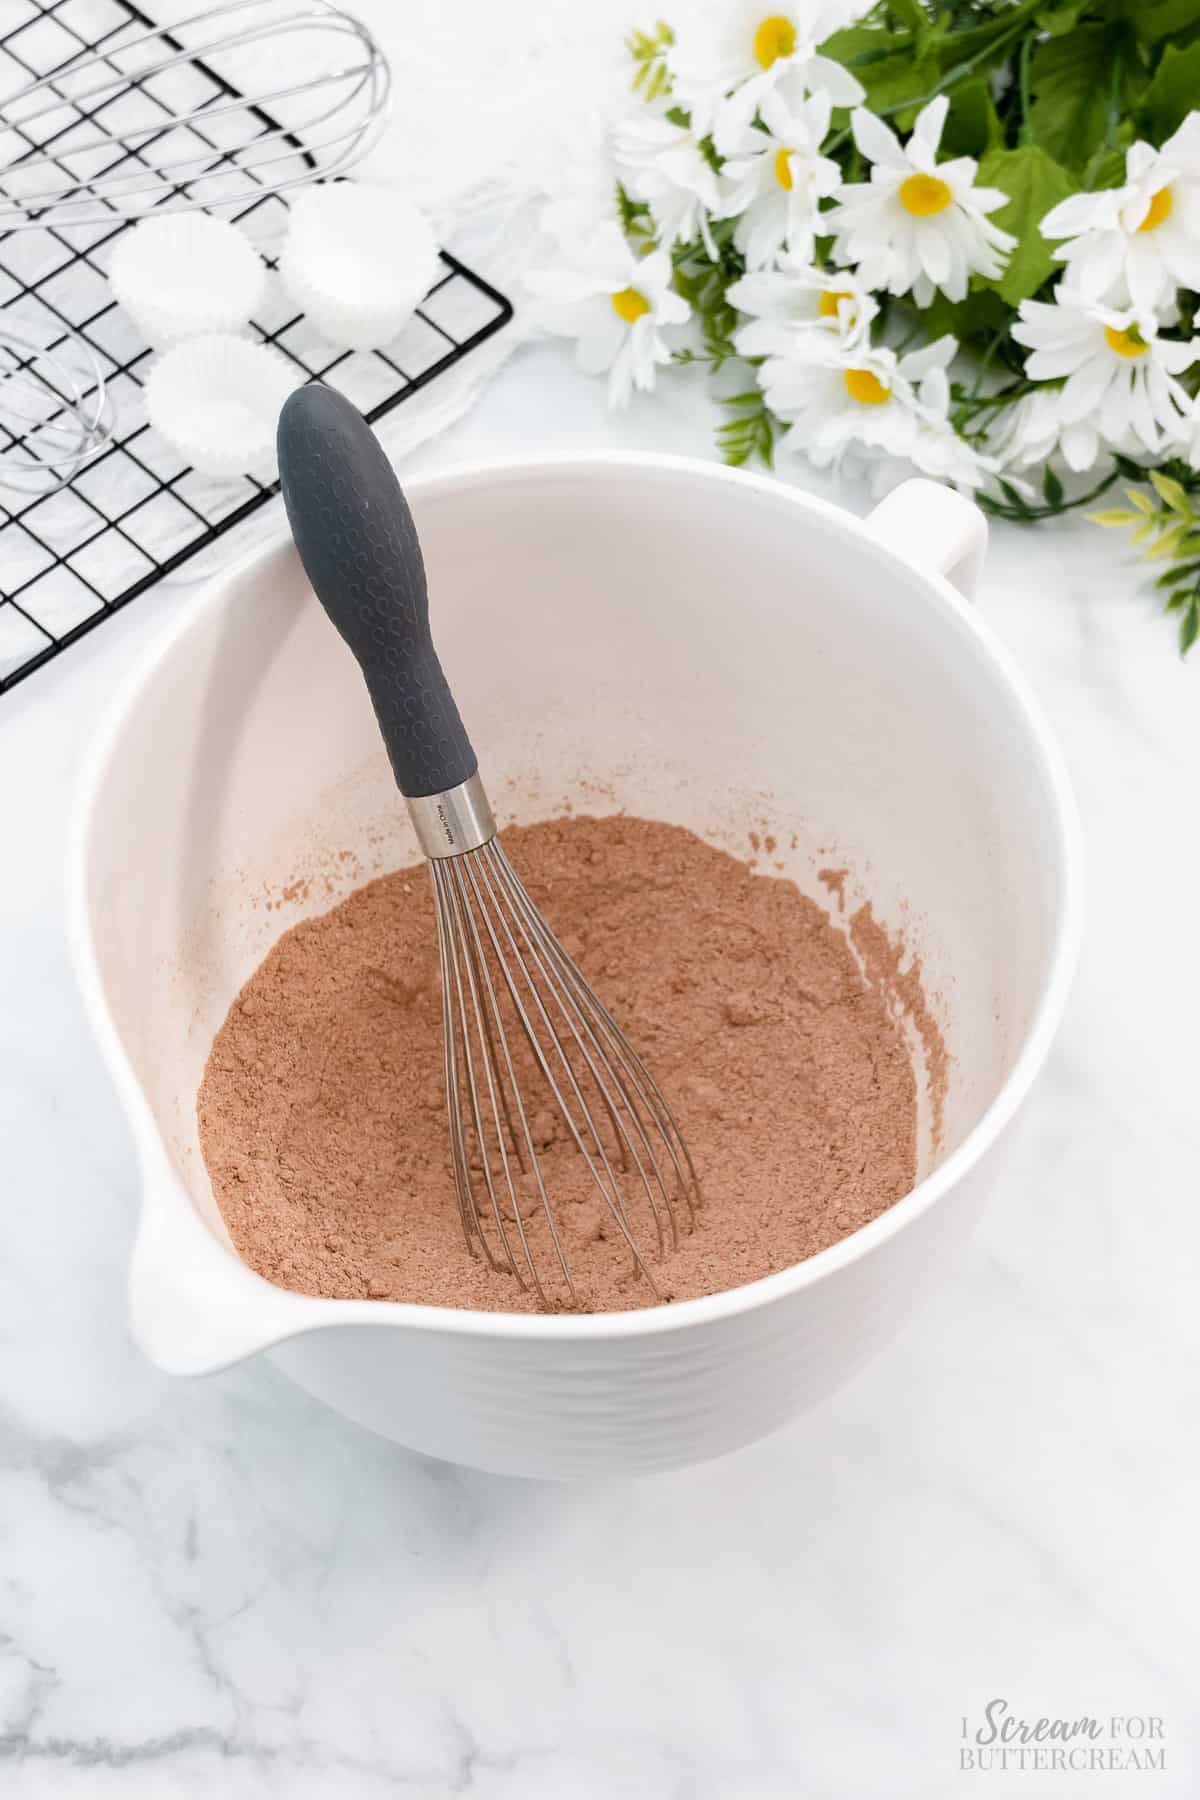 Dry ingredients in a white mixing bowl with a whisk.